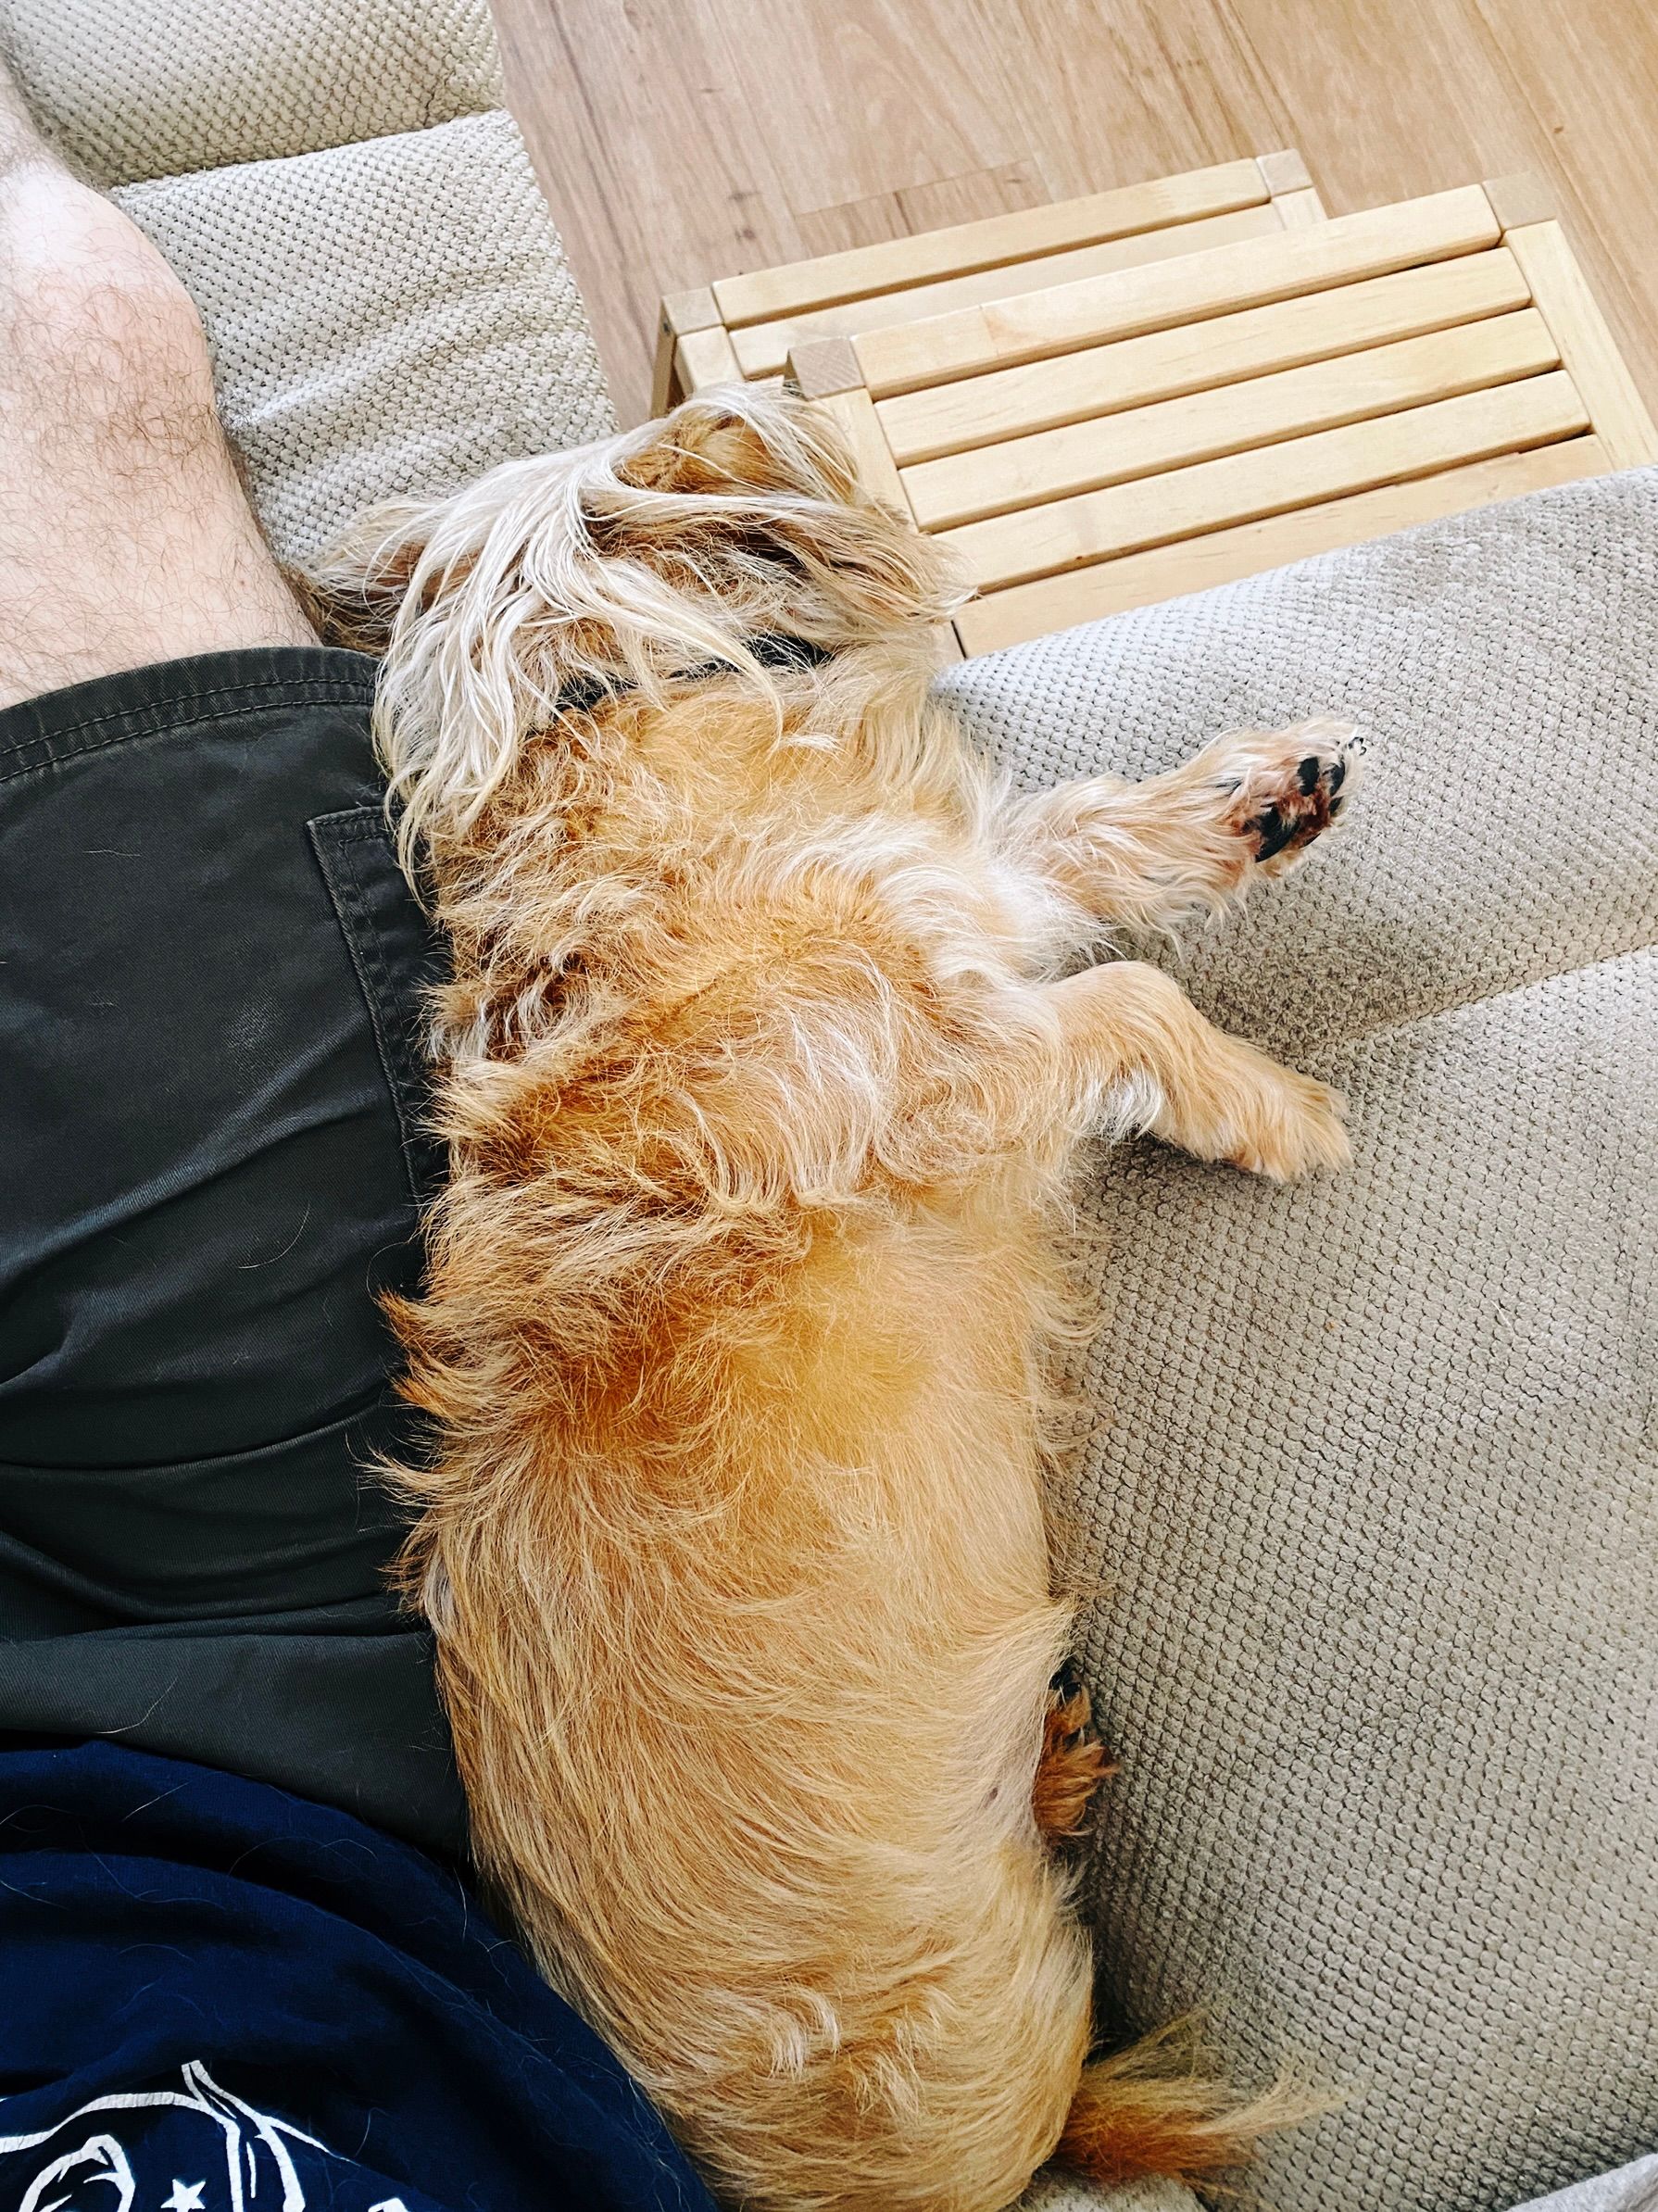 A photo of a small scruffy blonde dog lying on his side against my leg on a tan-coloured lounge. His head is slightly off the front of the lounge.